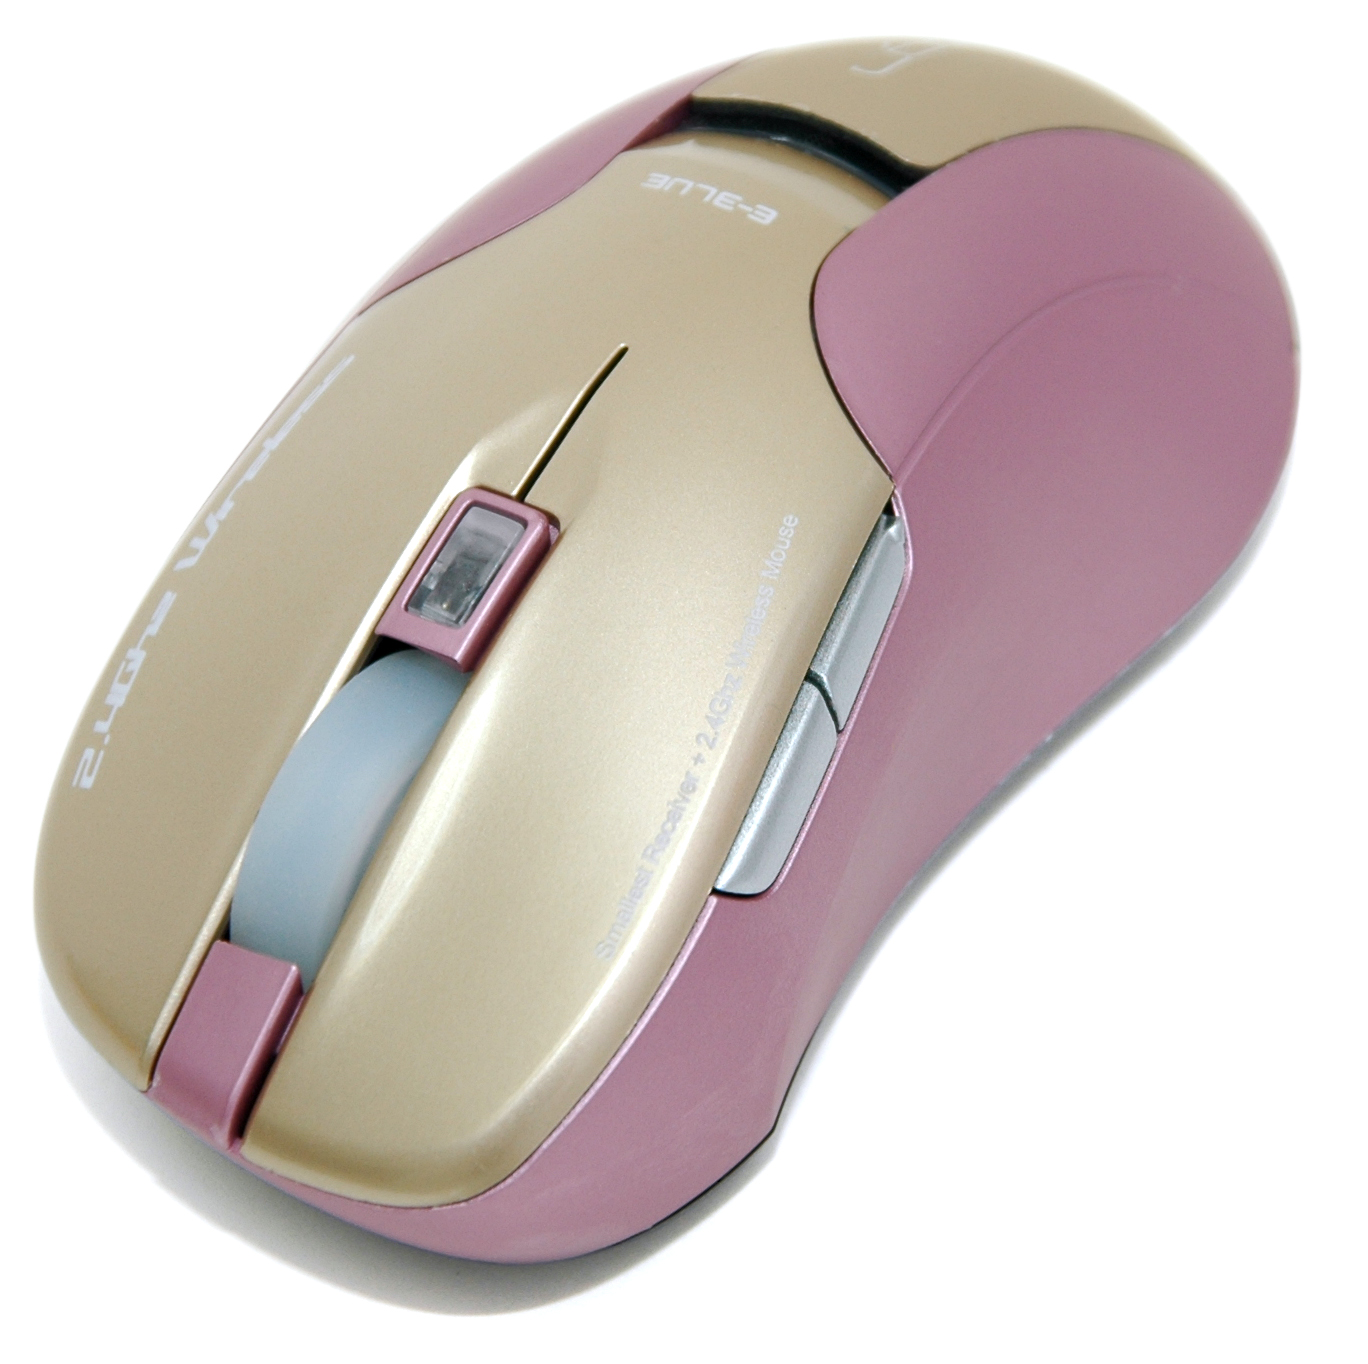 et wireless mouse software update 1.0